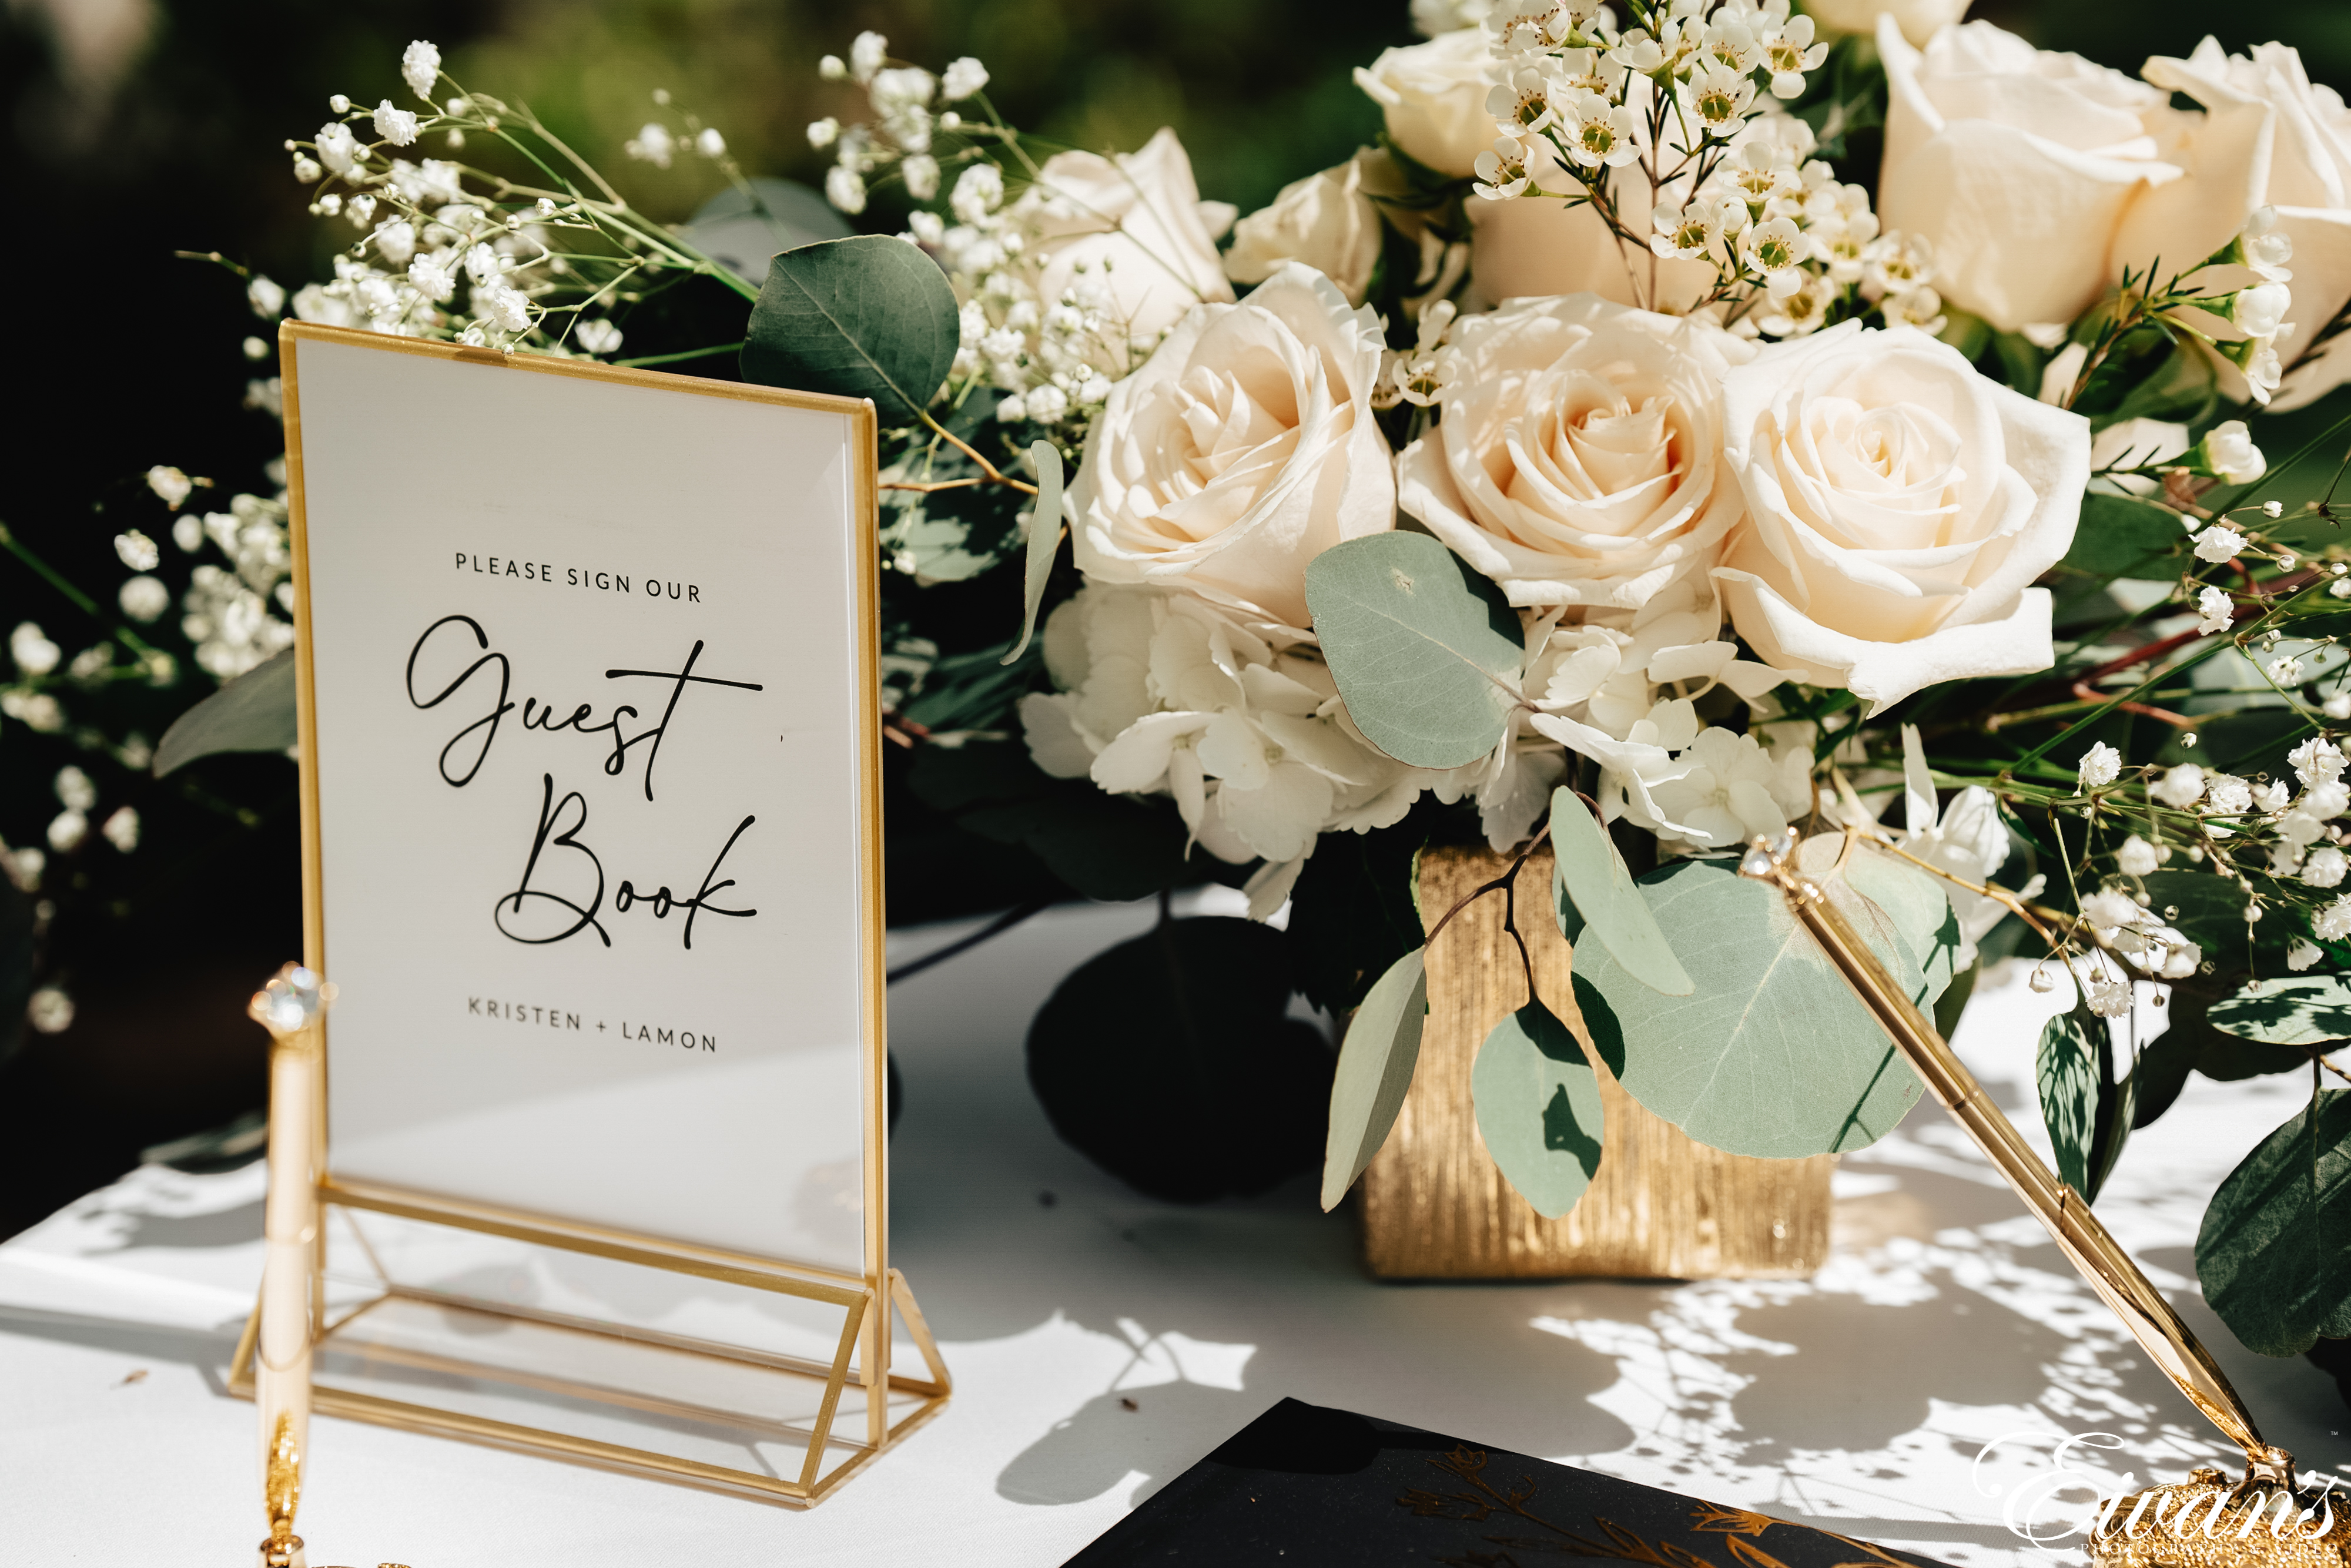 Elevate your wedding with a polaroid guest book that is made just for